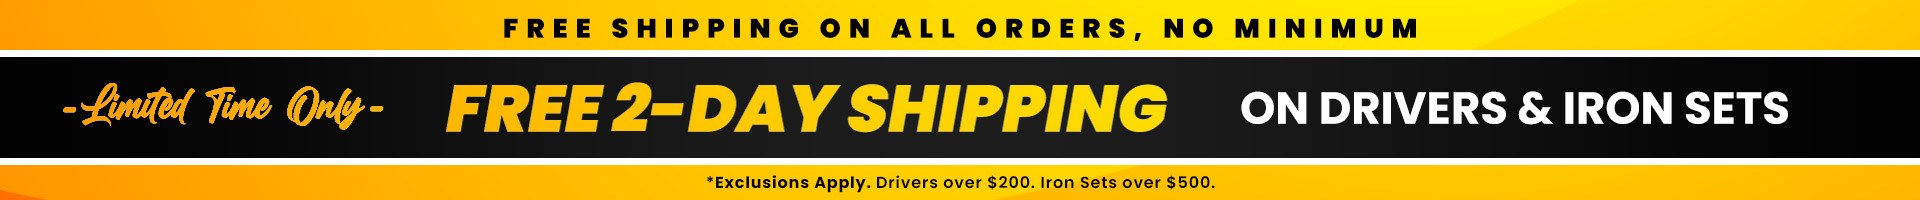 Free 2-Day Shipping on Golf Clubs